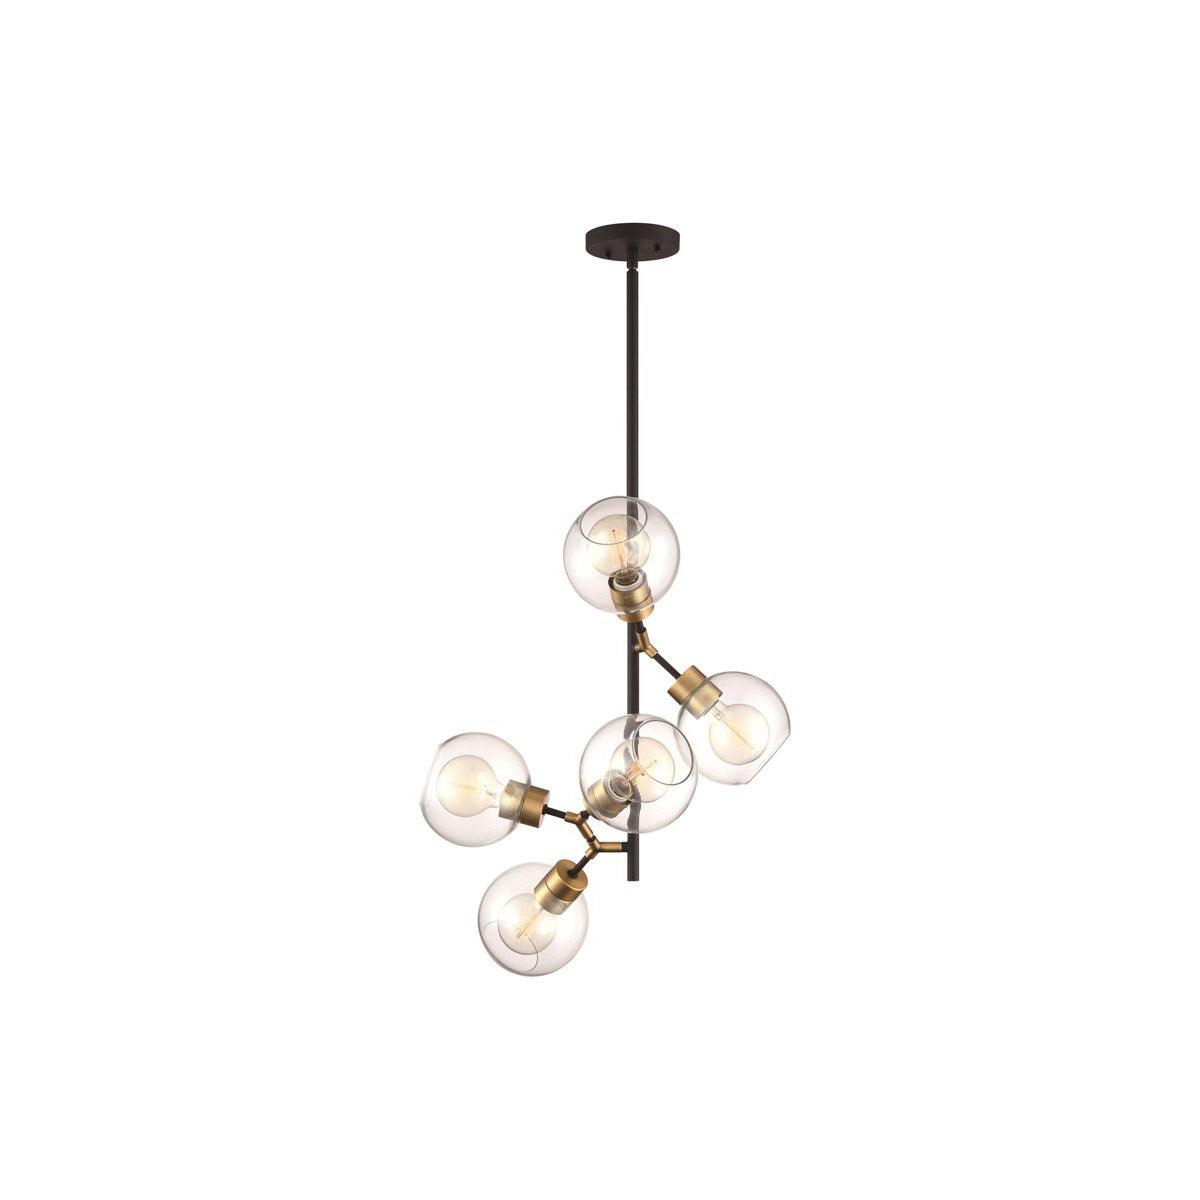 Steel Arms with Clear Glass Shade Adjustable Pendant - LV LIGHTING